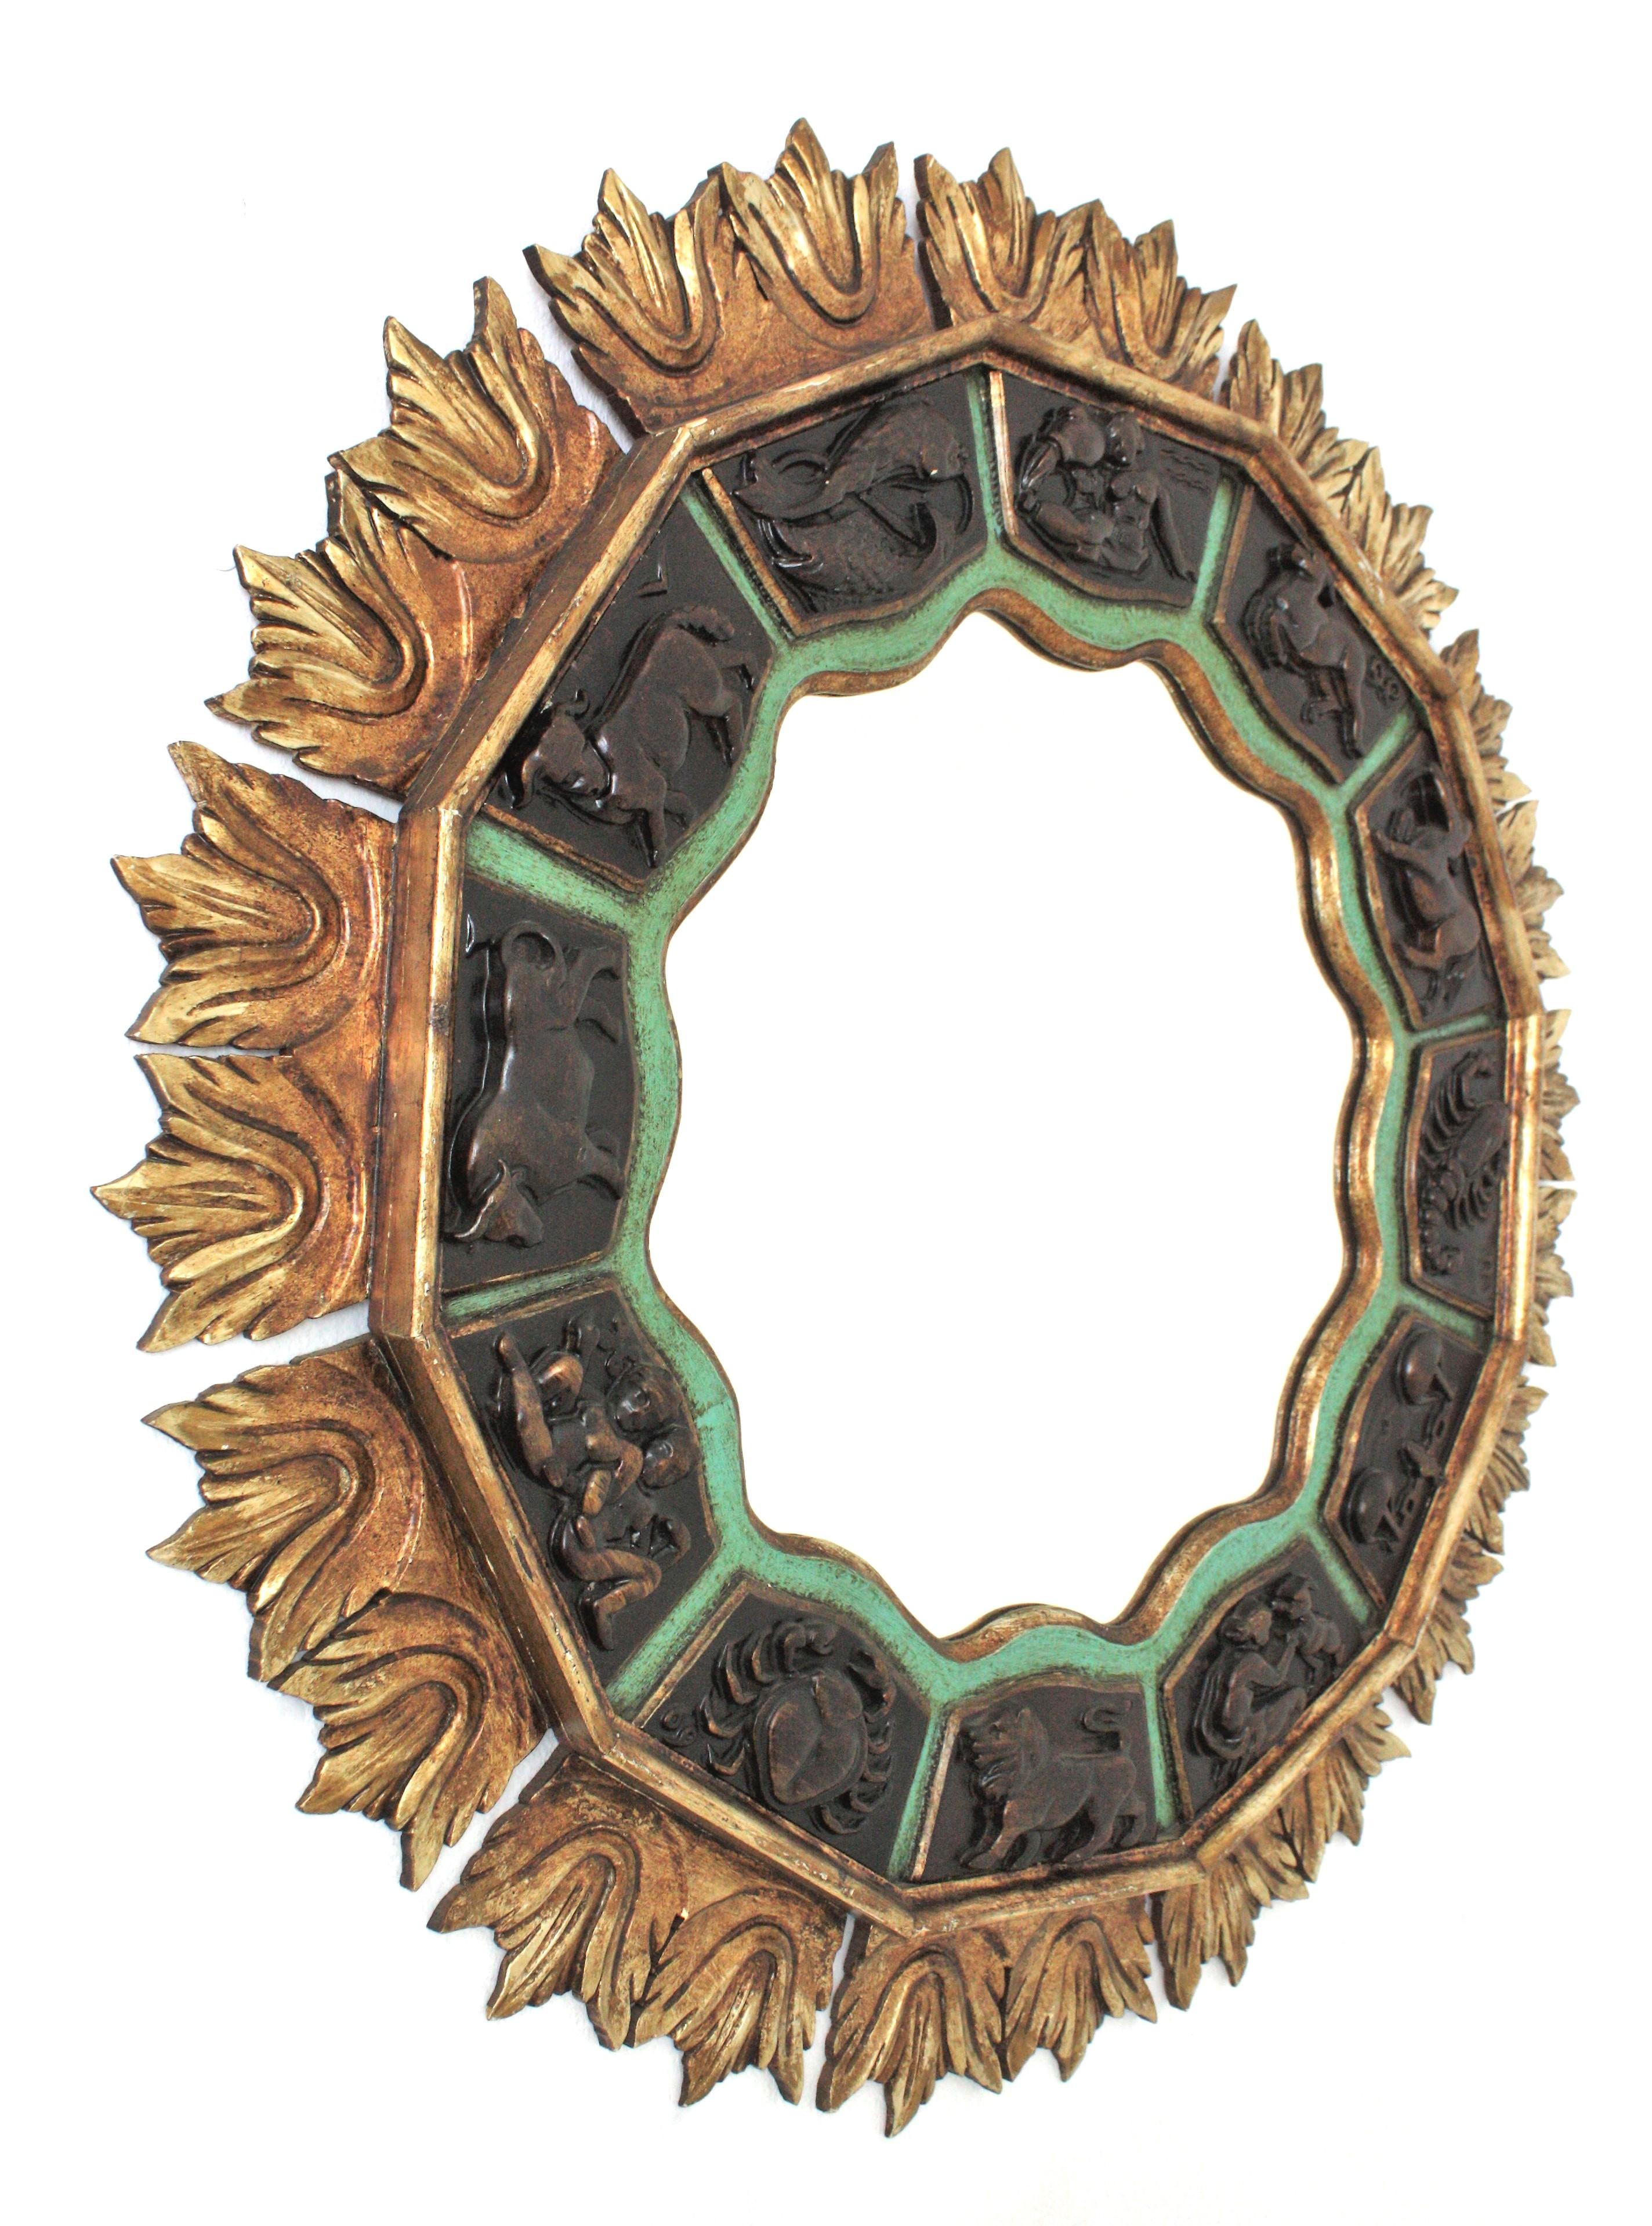 Spanish Sunburst Zodiac Mirror with Carved Giltwood & Green Frame, 1950s For Sale